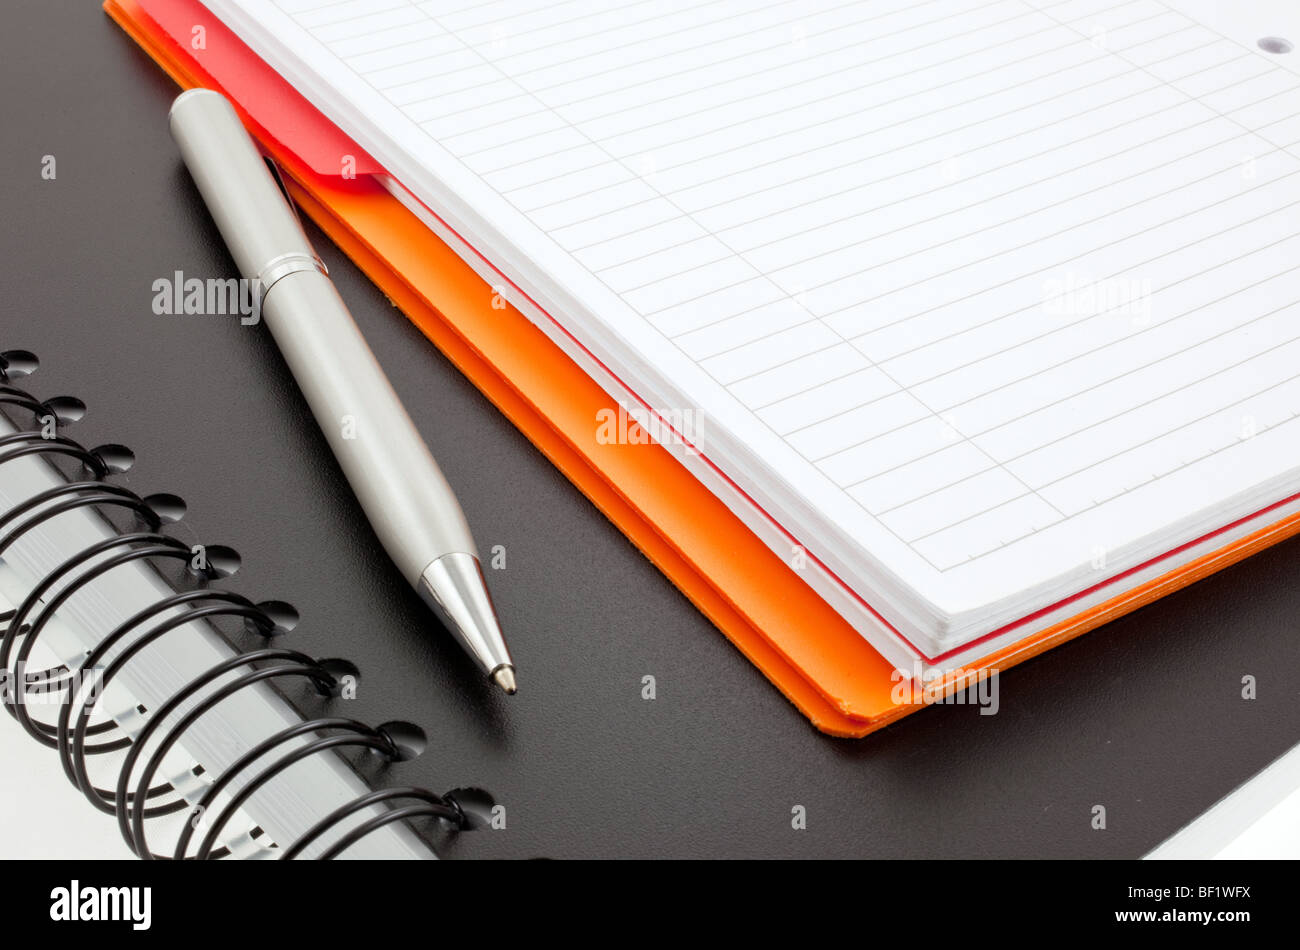 silver pen and two paper notebooks: orange and black Stock Photo